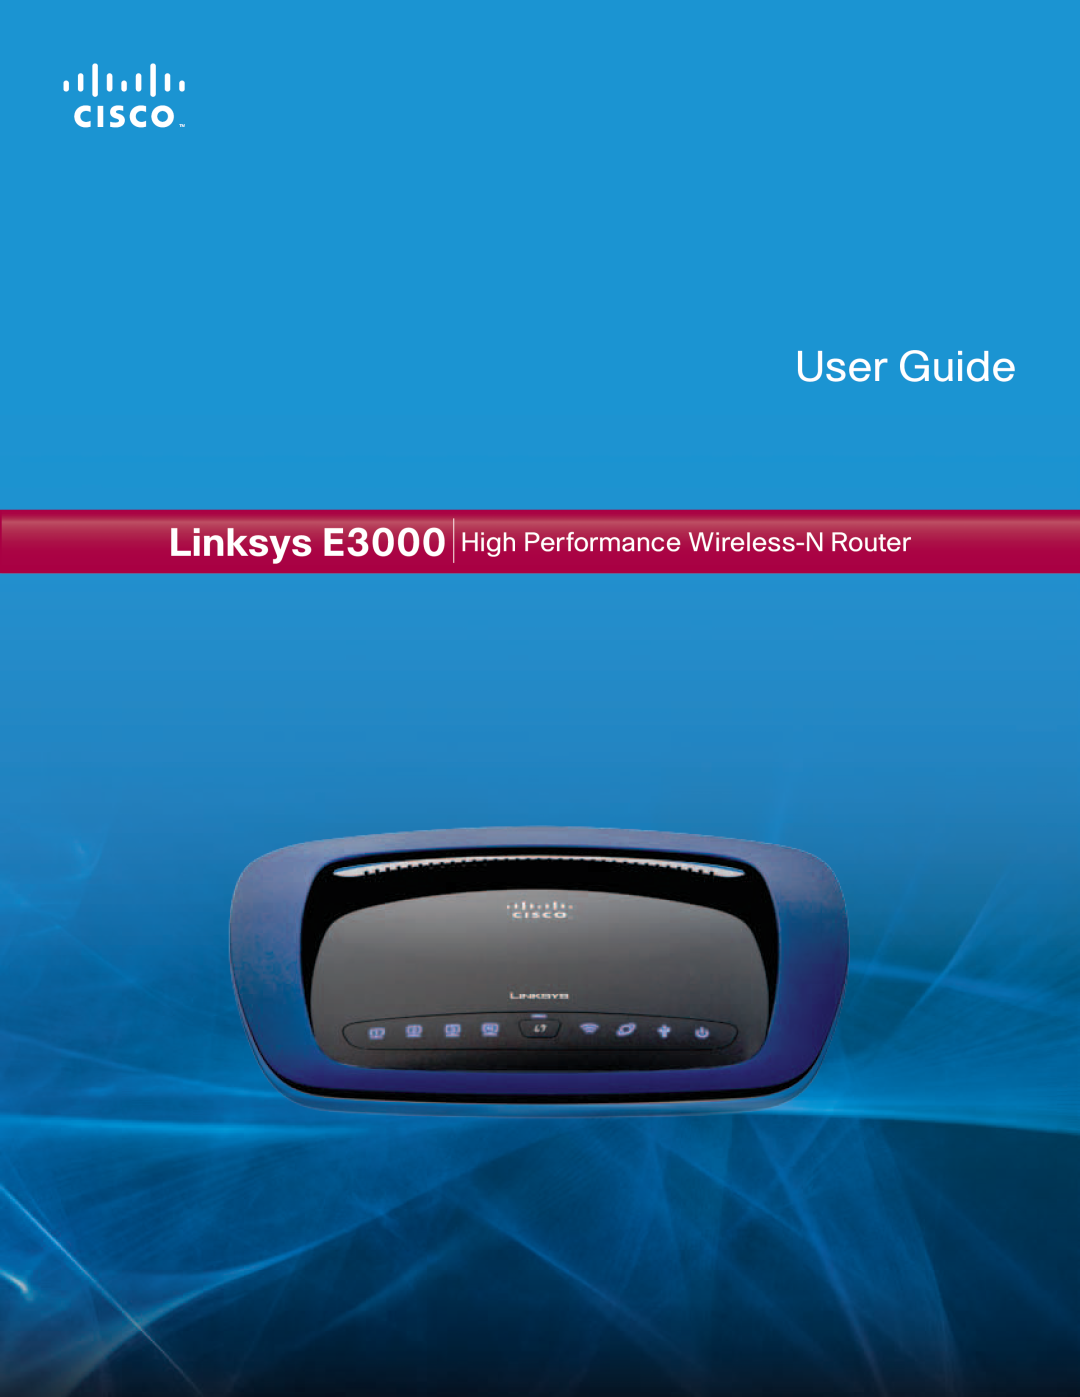 Linksys manual User Guide, Linksys E3000, High Performance Wireless-N Router 